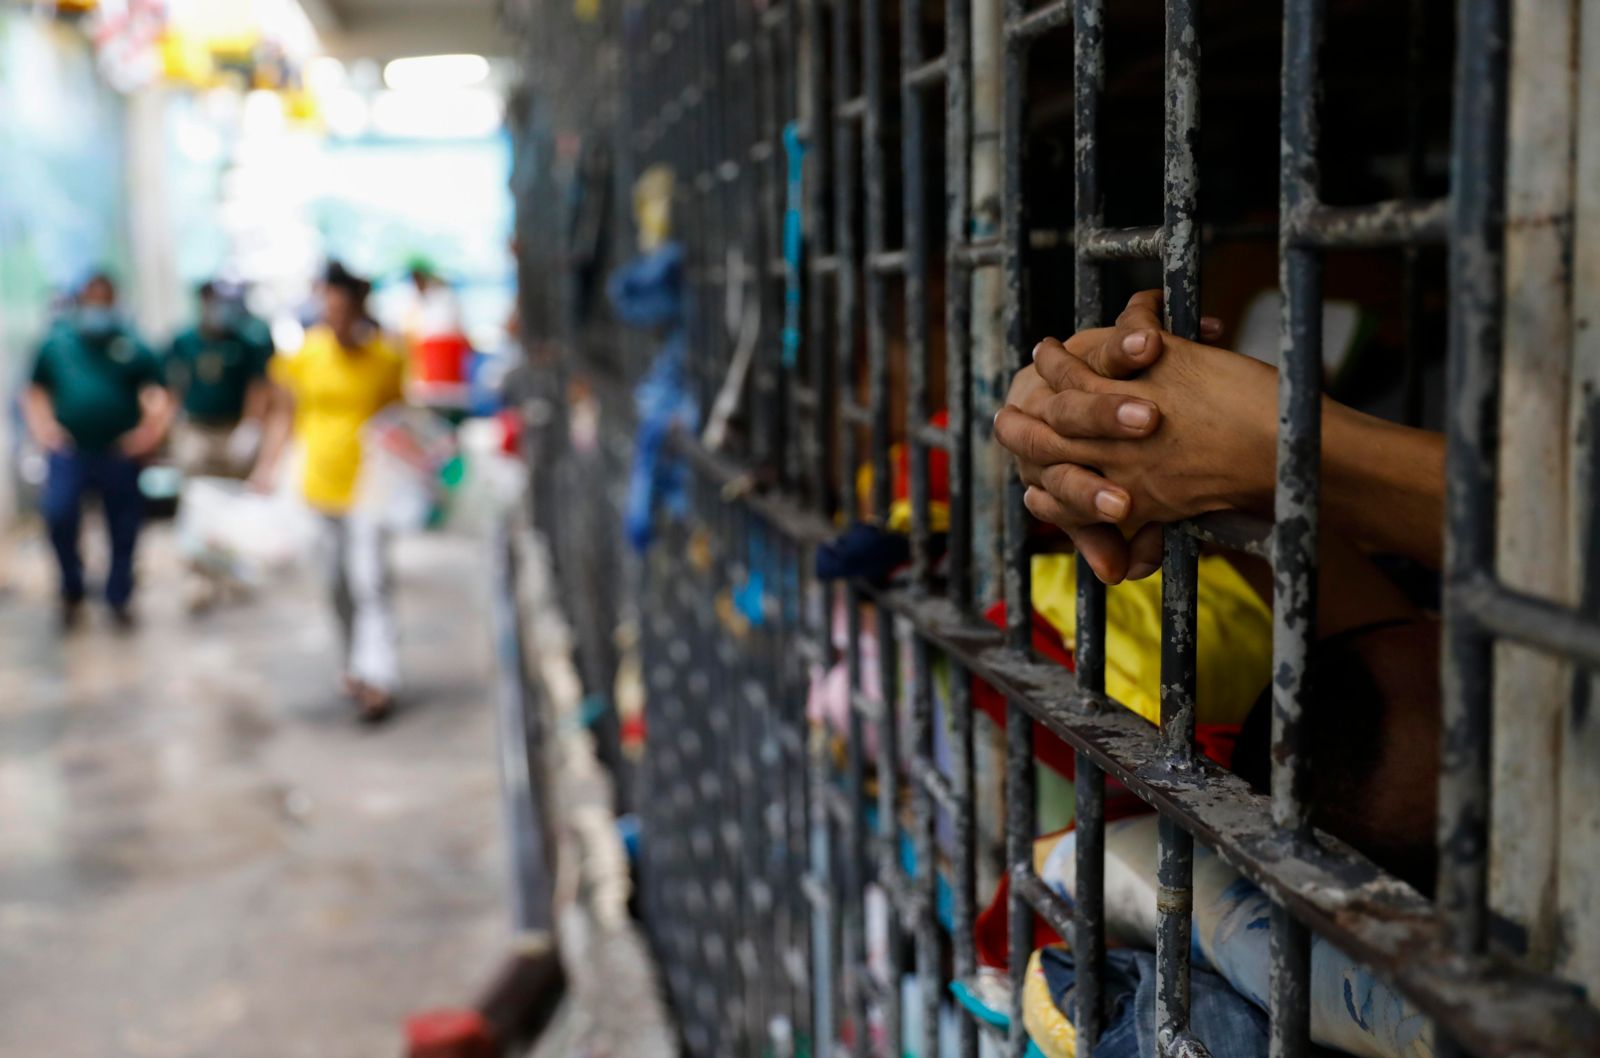 When states obscure illegal imprisonments, what is the role of human rights actors?